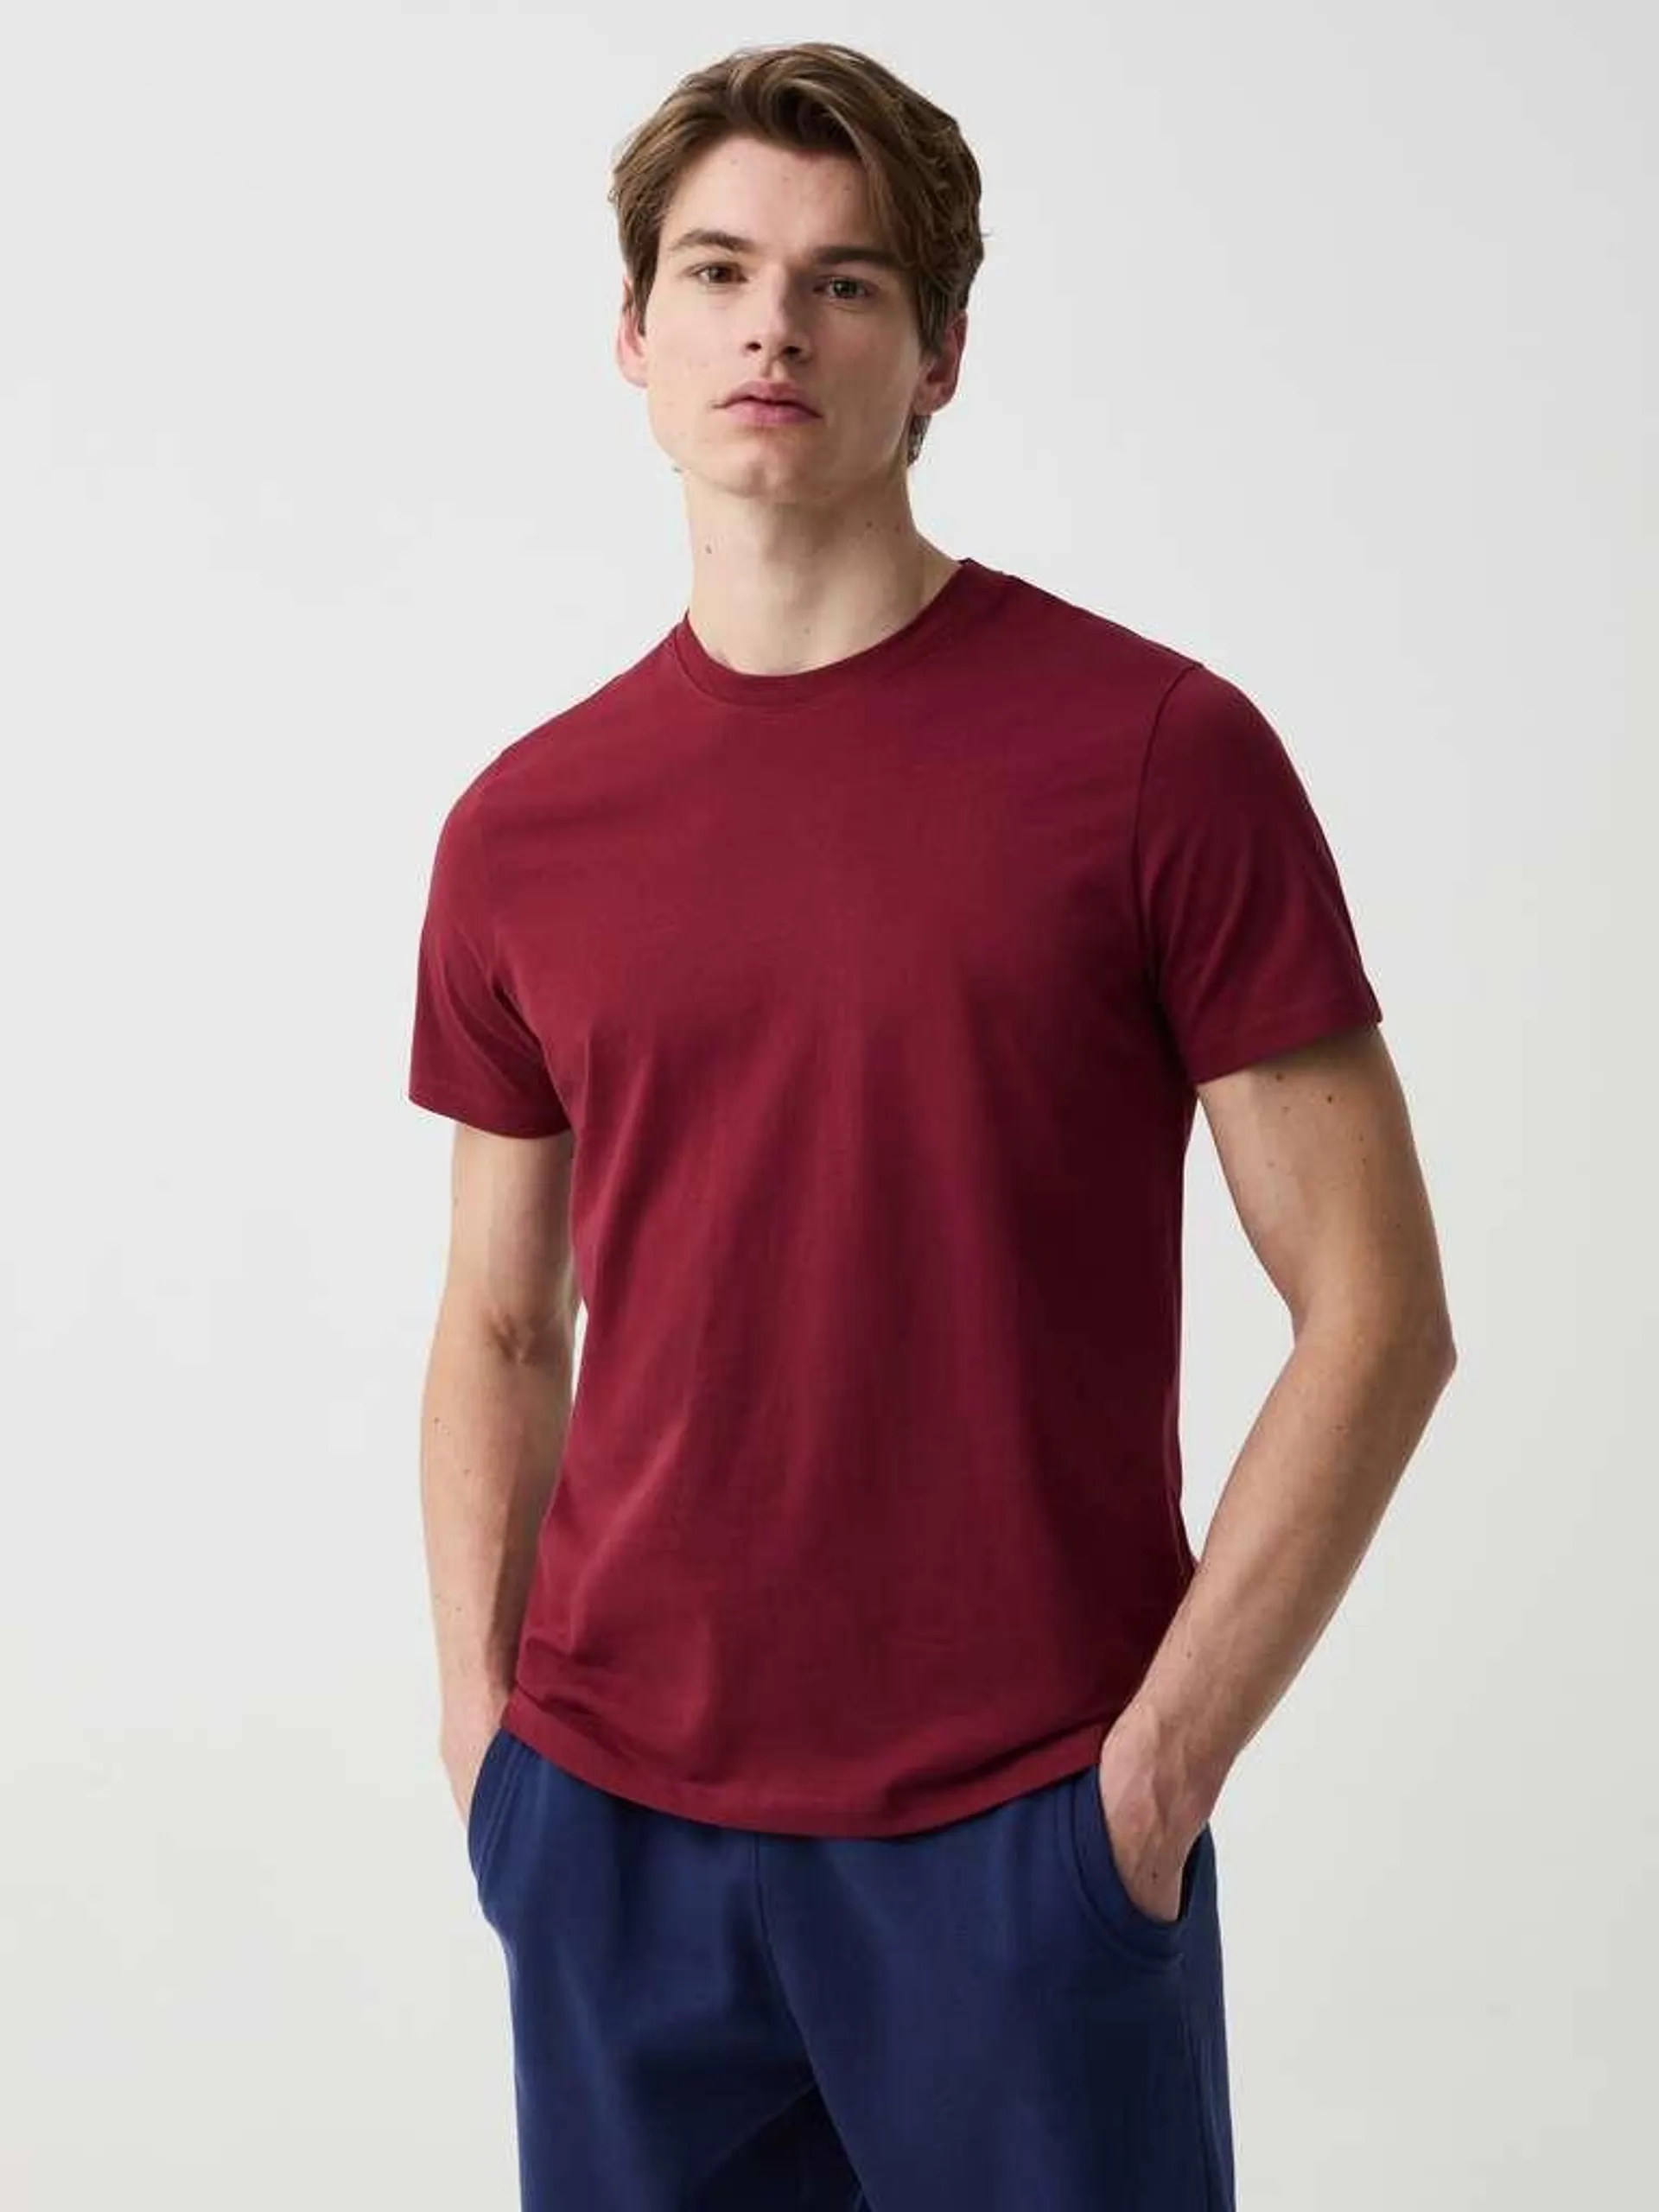 Claret Red Organic cotton T-shirt with round neck